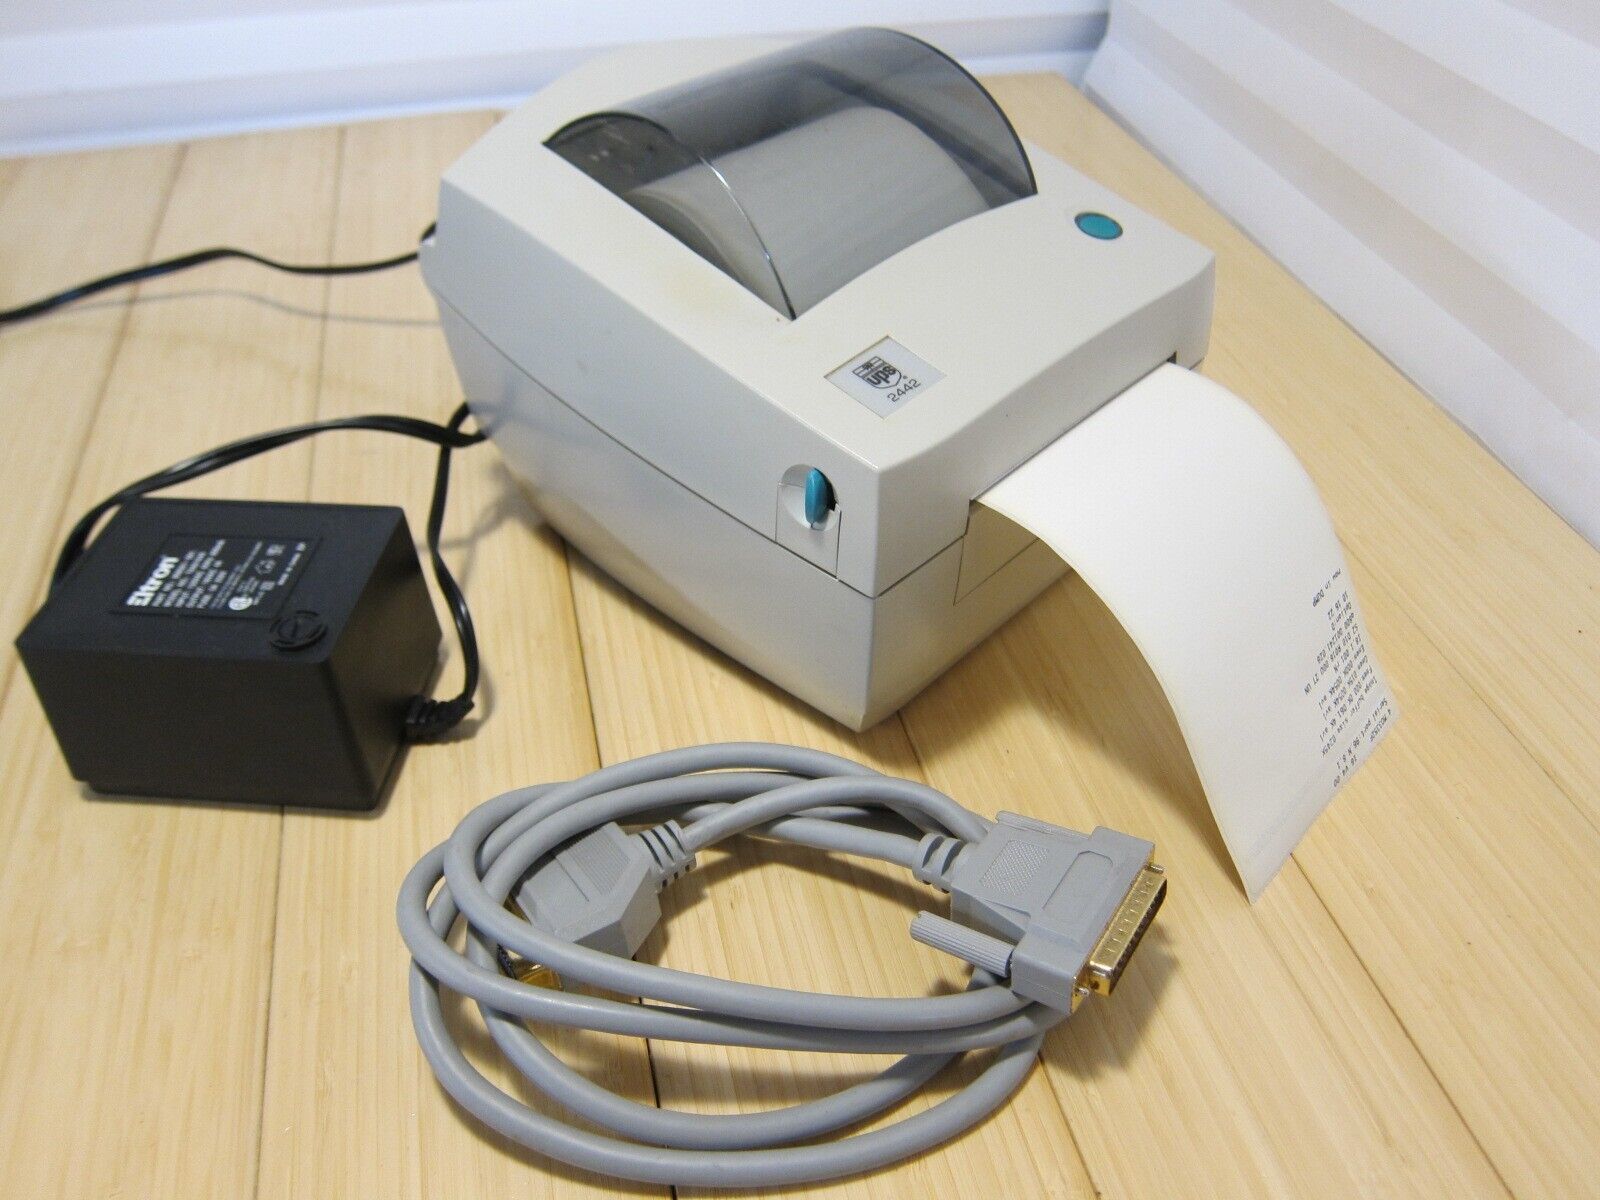 Primary image for Zebra LP2442 Thermal Label Shipping Printer Parallel To USB Like LP2844 Bundle